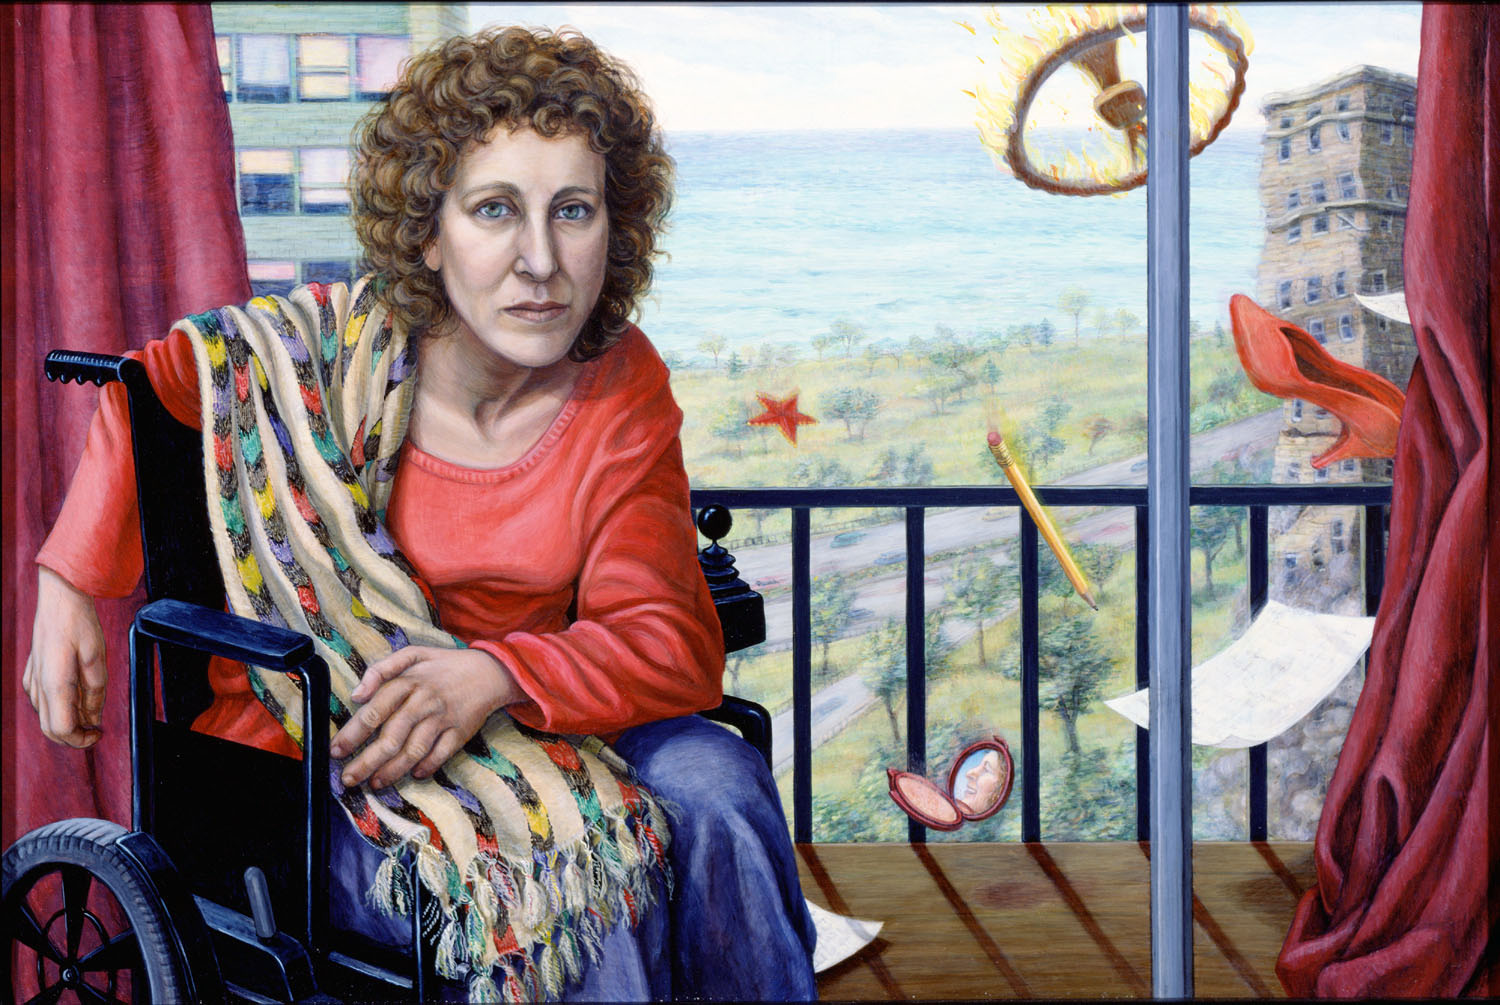 painted woman in wheelchair in front of a balcony with a scenic view and various objects floating in the air